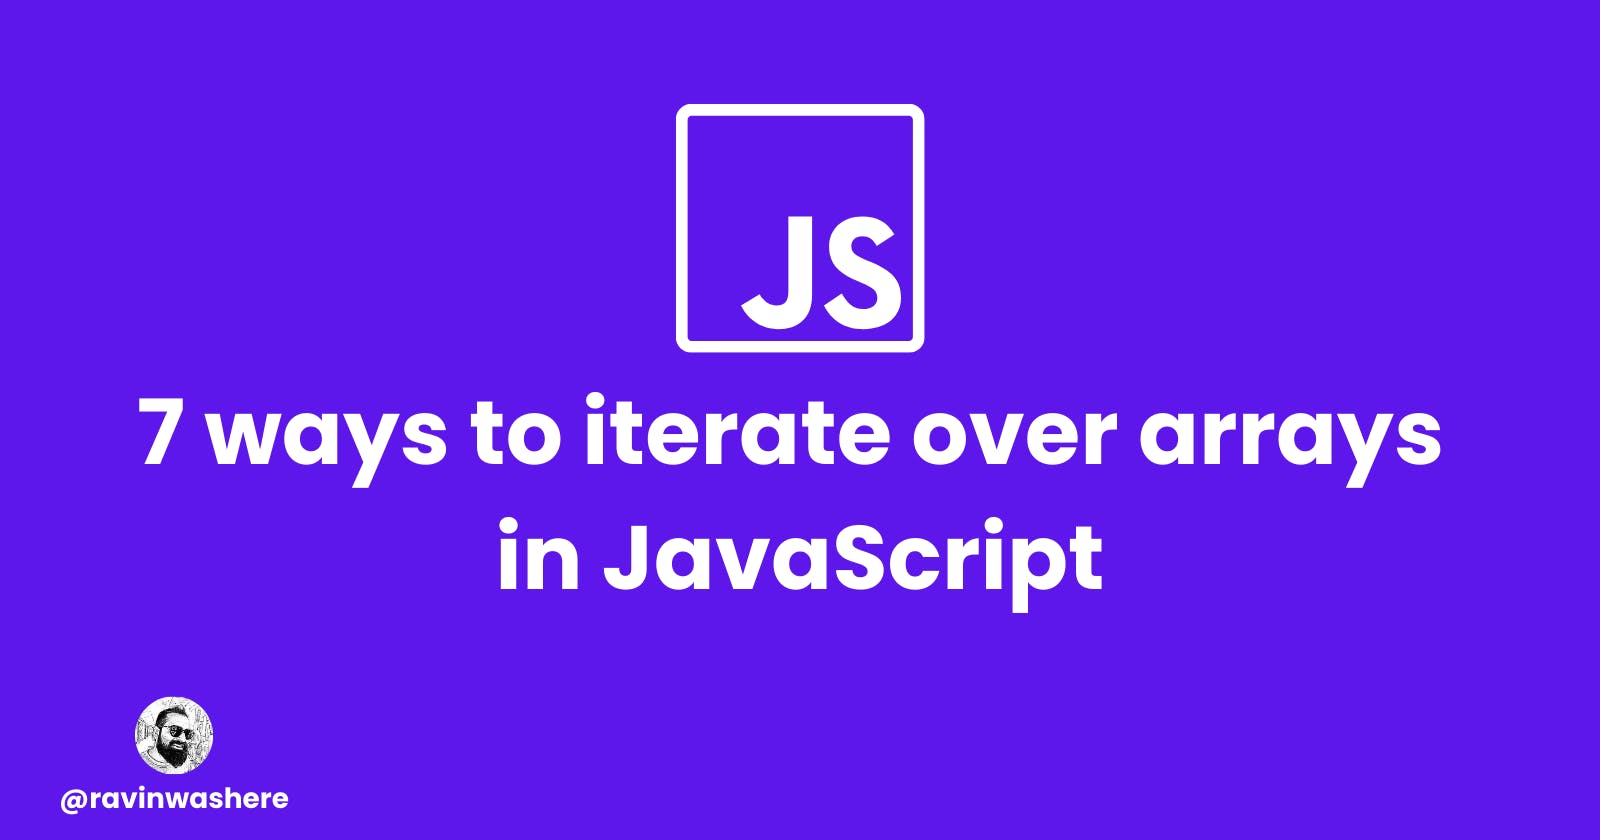 7 ways to iterate over arrays in JavaScript